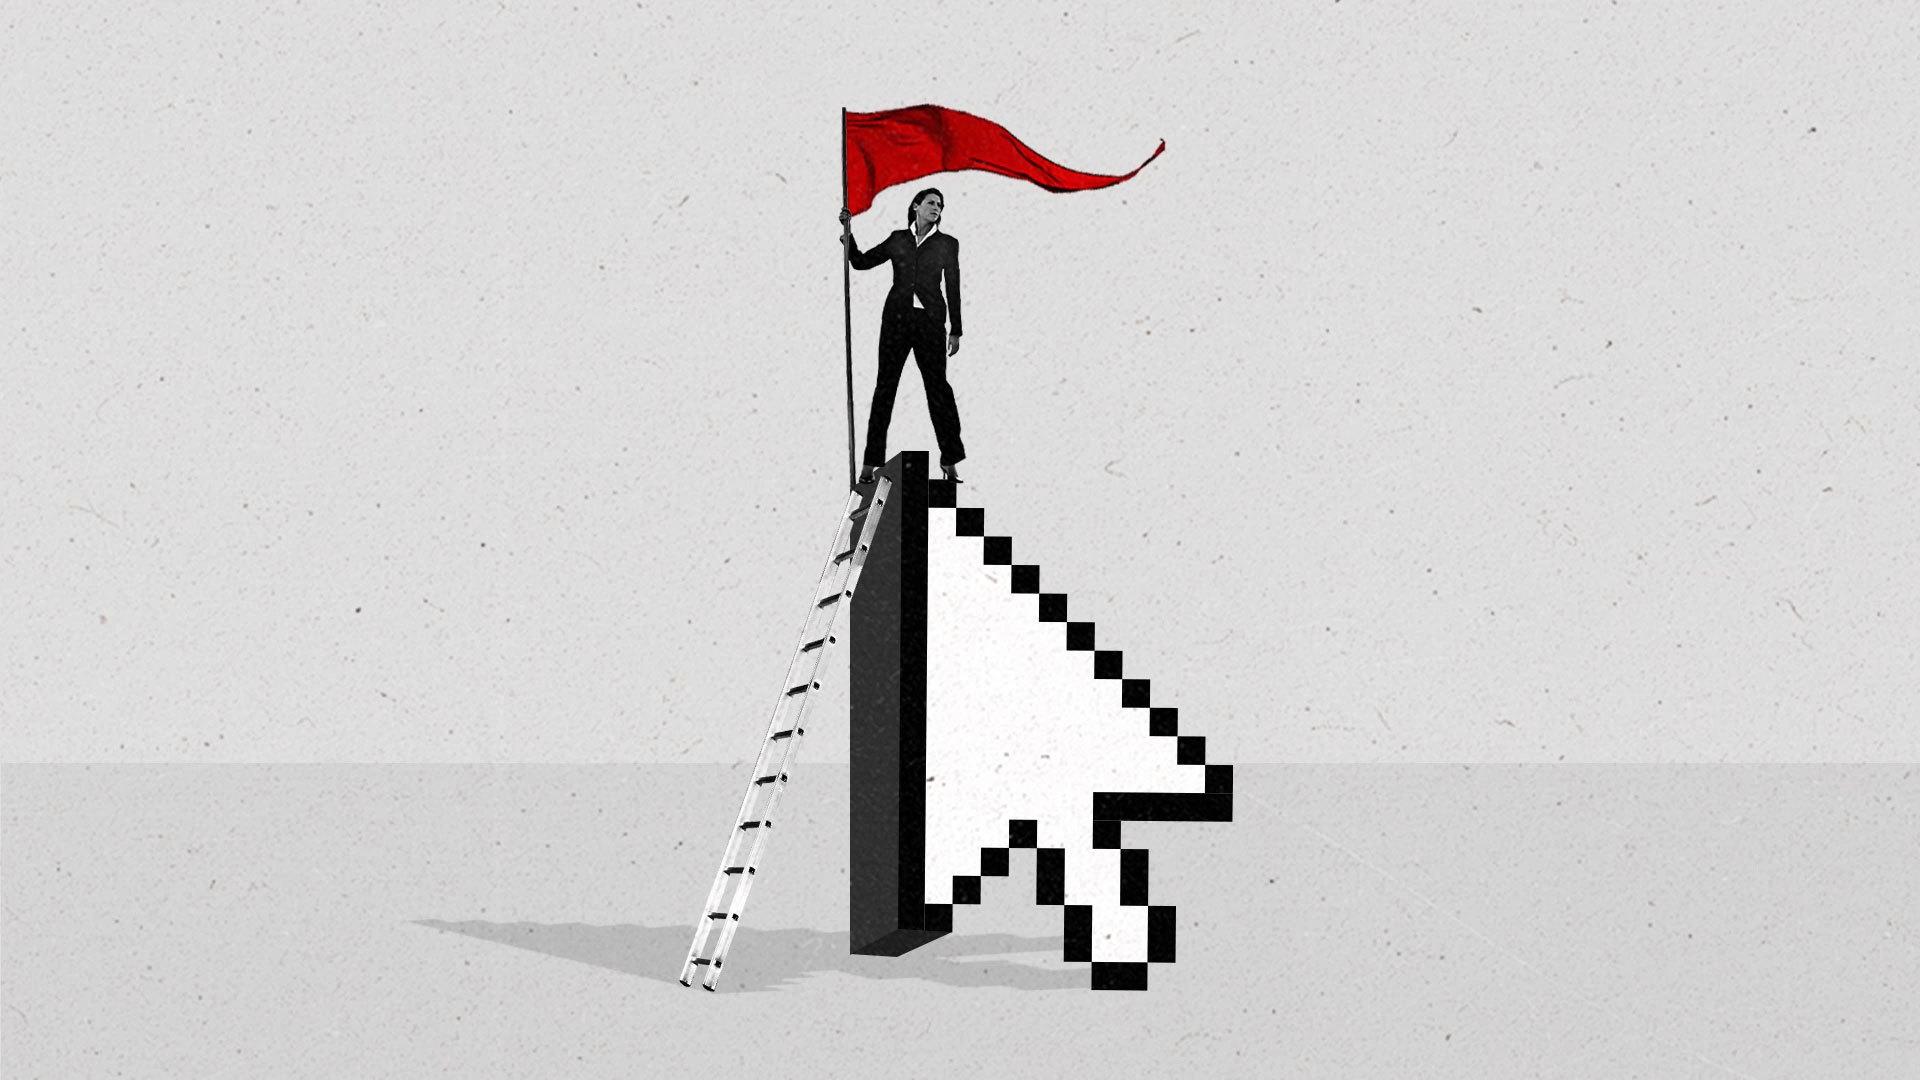 A woman in business attire stands triumphantly with a flag atop an oversized cursor arrow, with a ladder leaning against it.